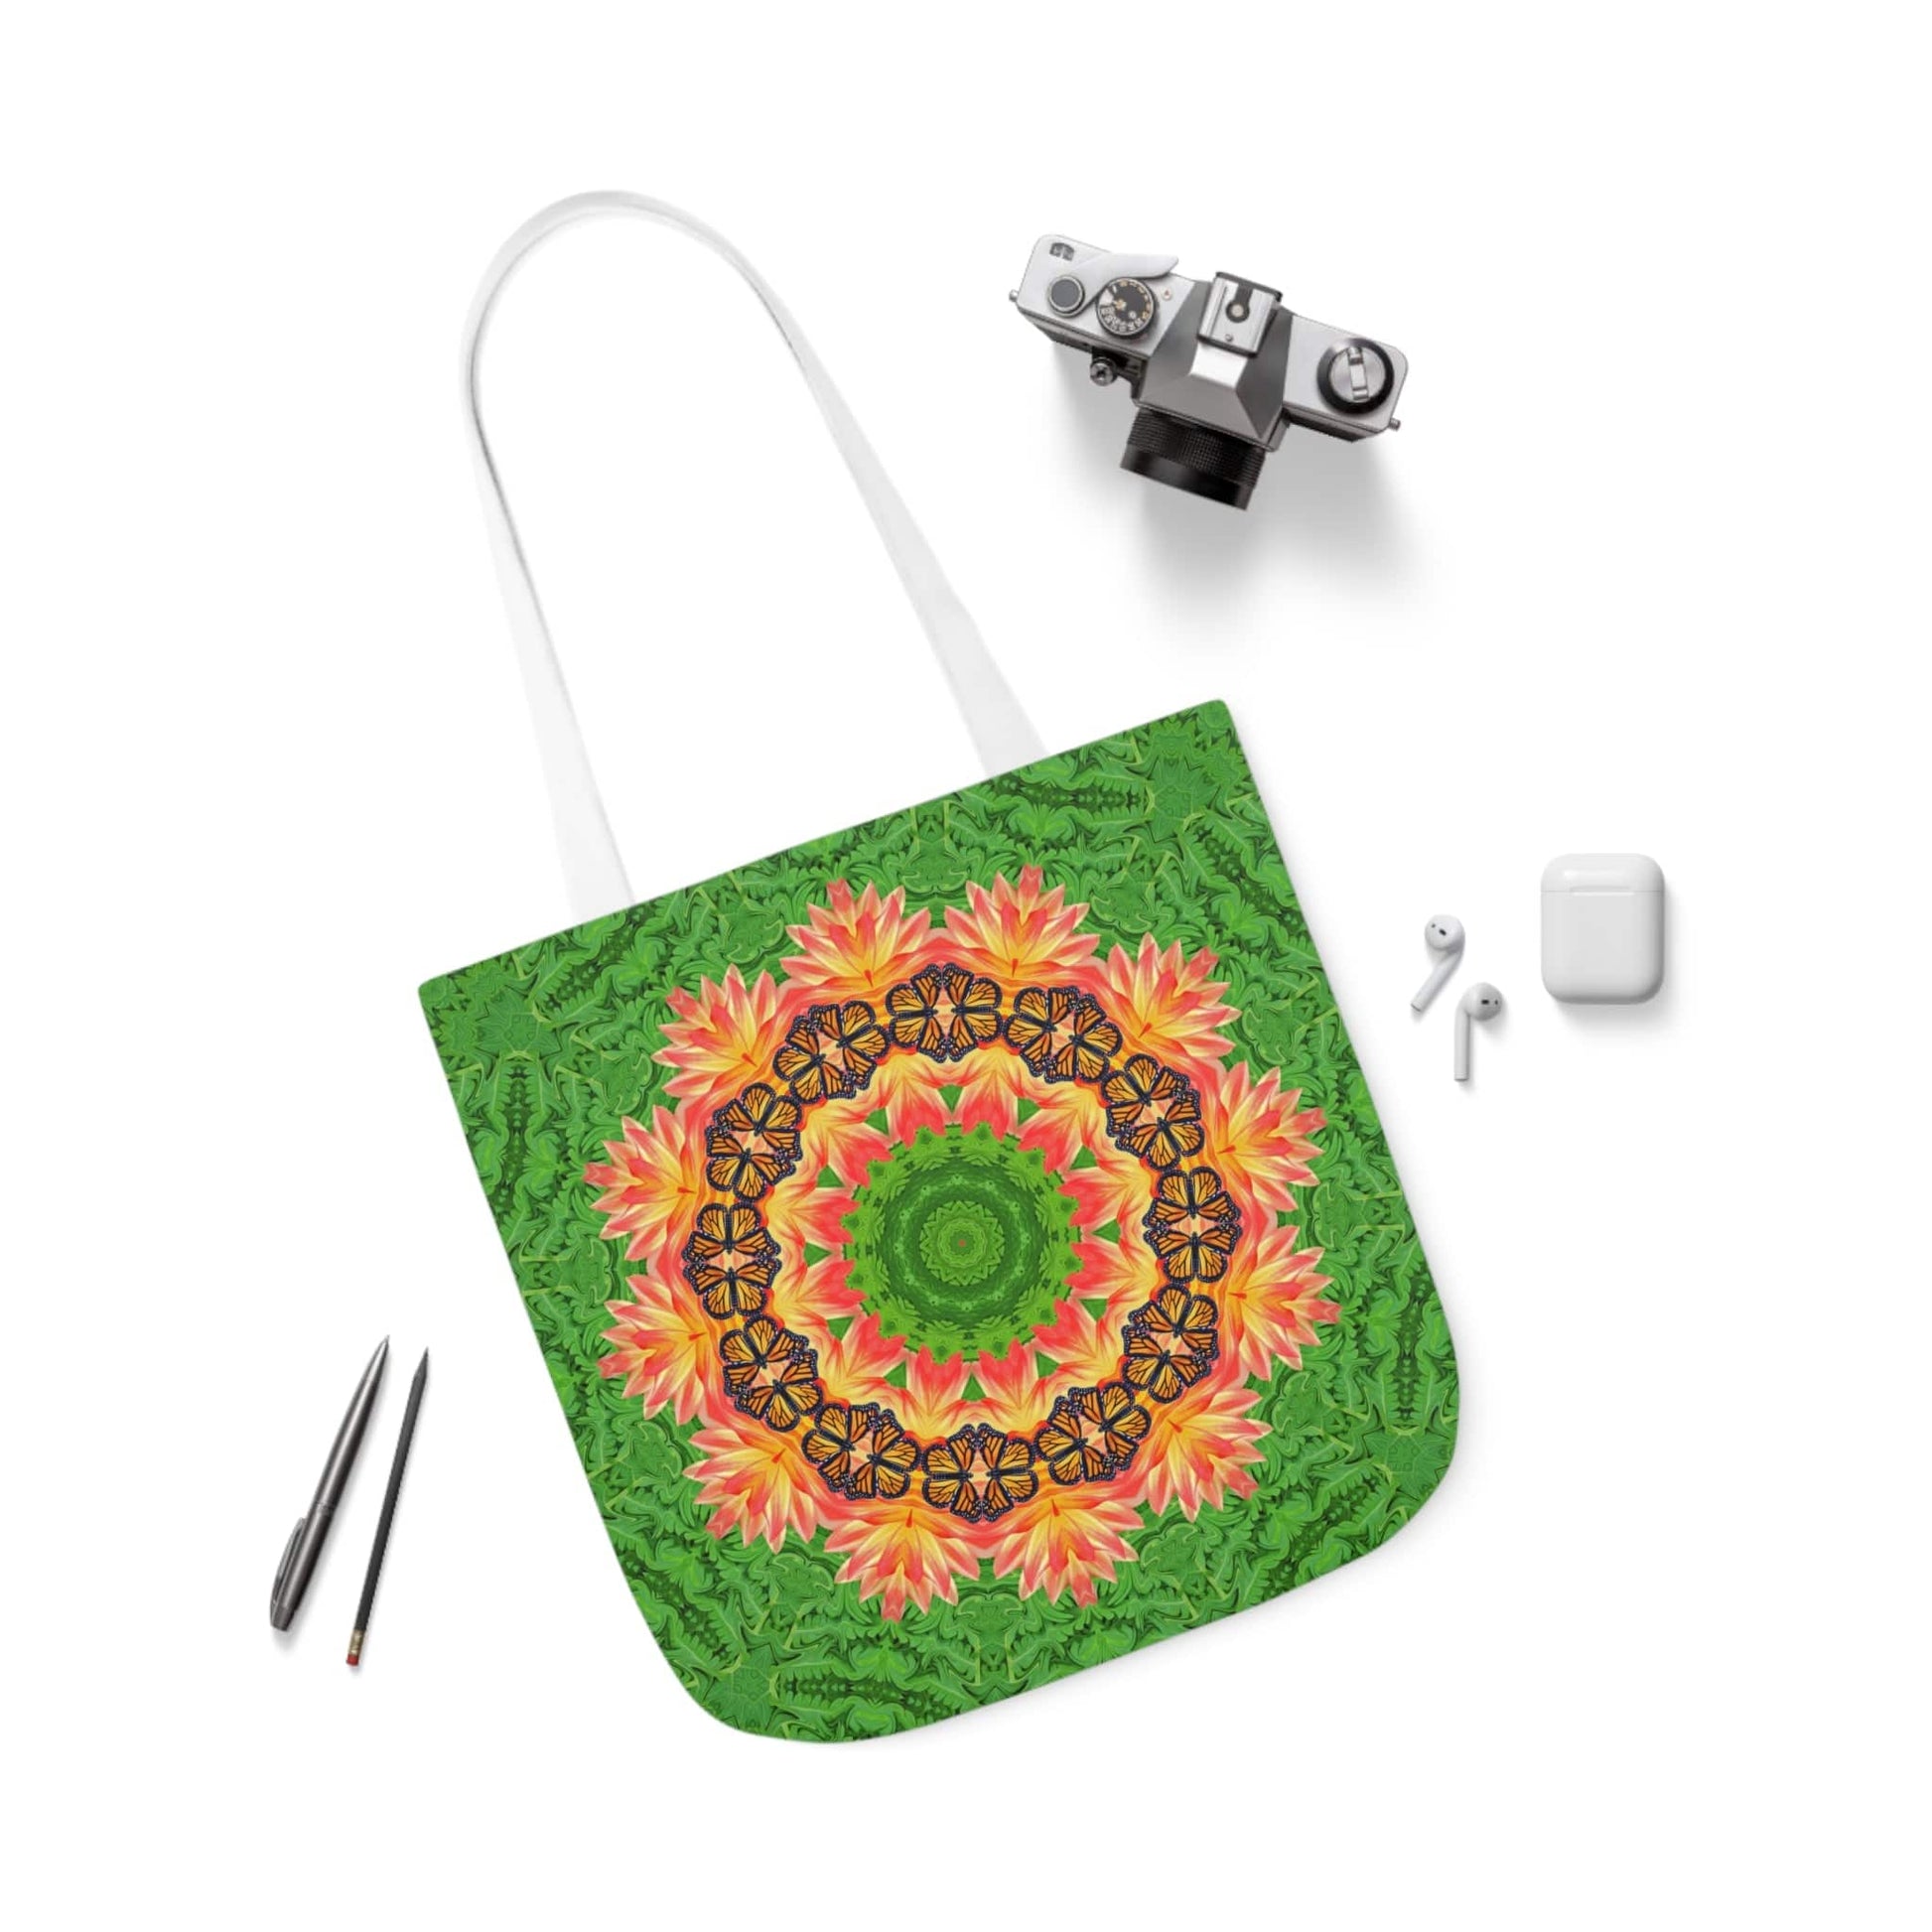 Monarch Butterfly Floral Mandala Tote Bag - Cute and Practical Everyday Accessory white handle